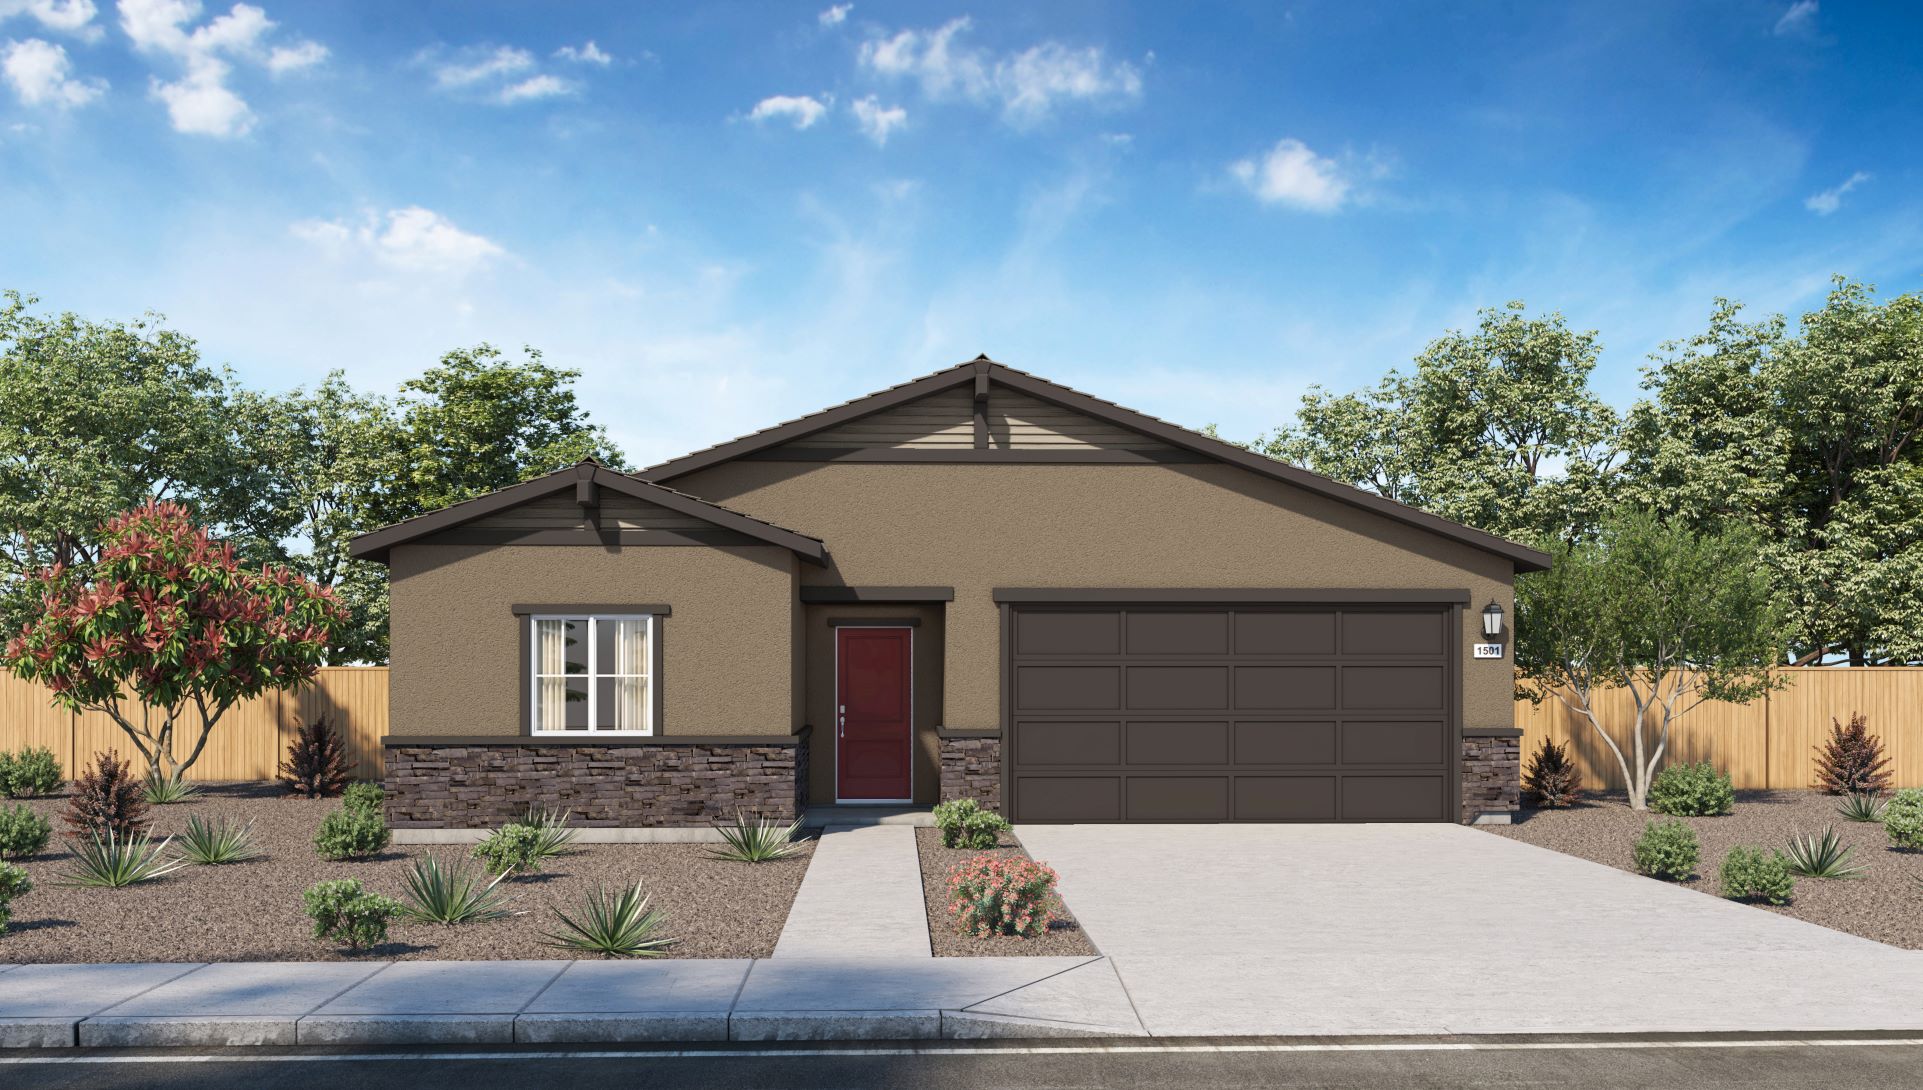 New Homes in The Terrace | Reno, NV | D.R. Horton